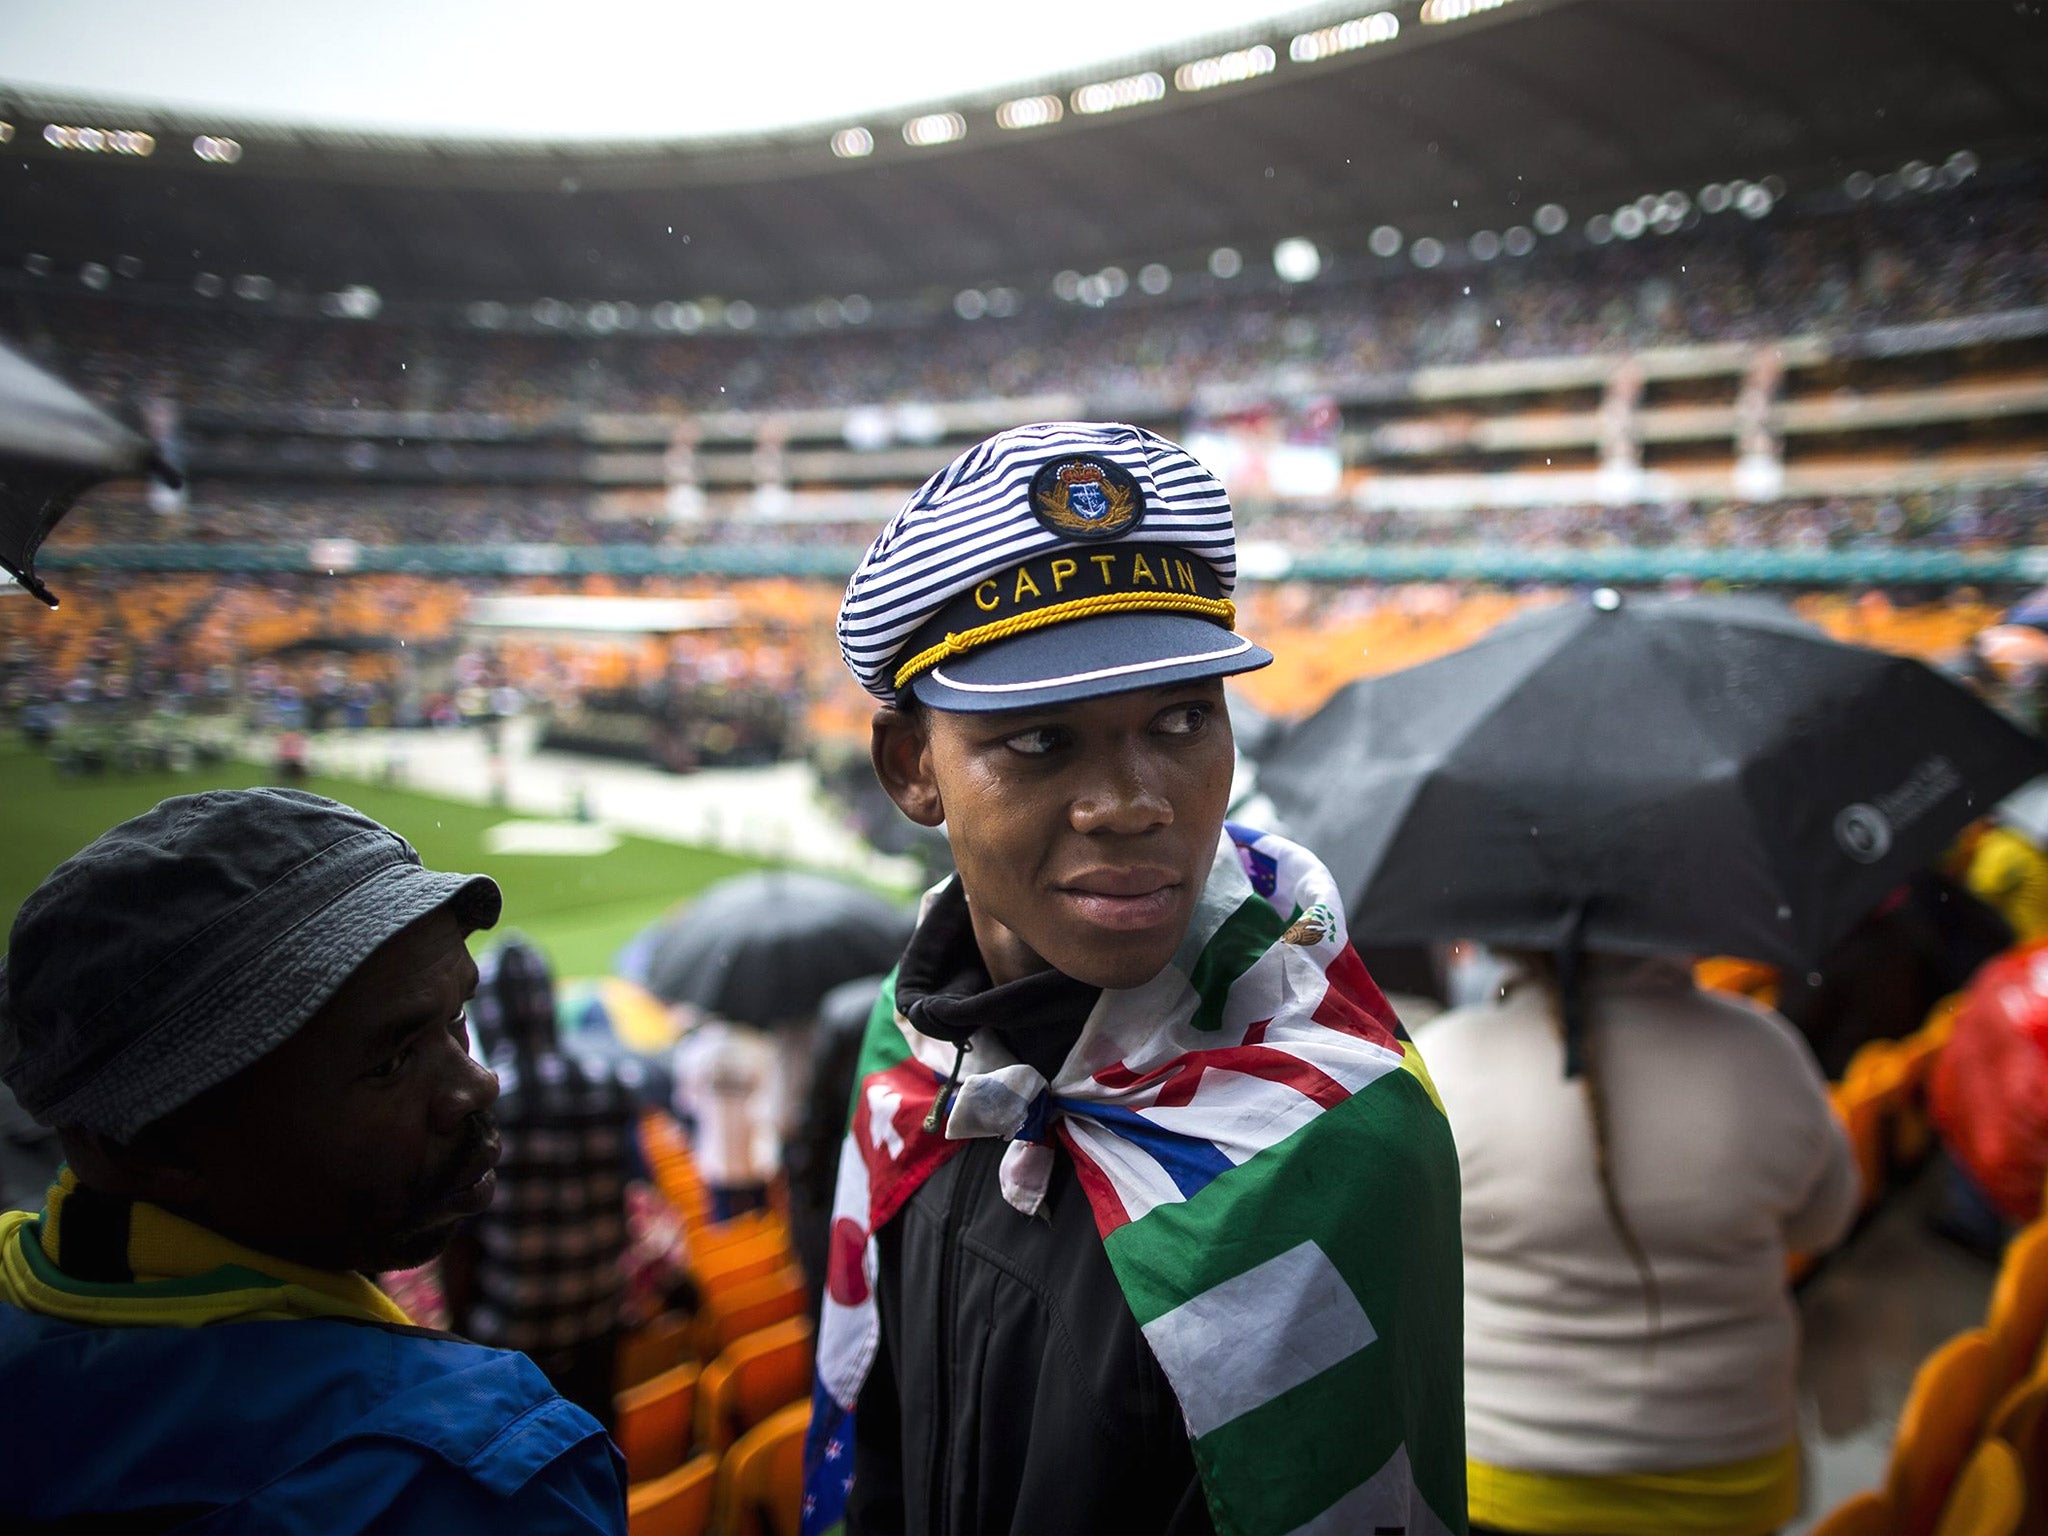 Thousands of mourners at the official memorial ceremony for Nelson Mandela booed and jeered the current president Jacob Zuma as the ceremony in the pouring rain veered wildly off script